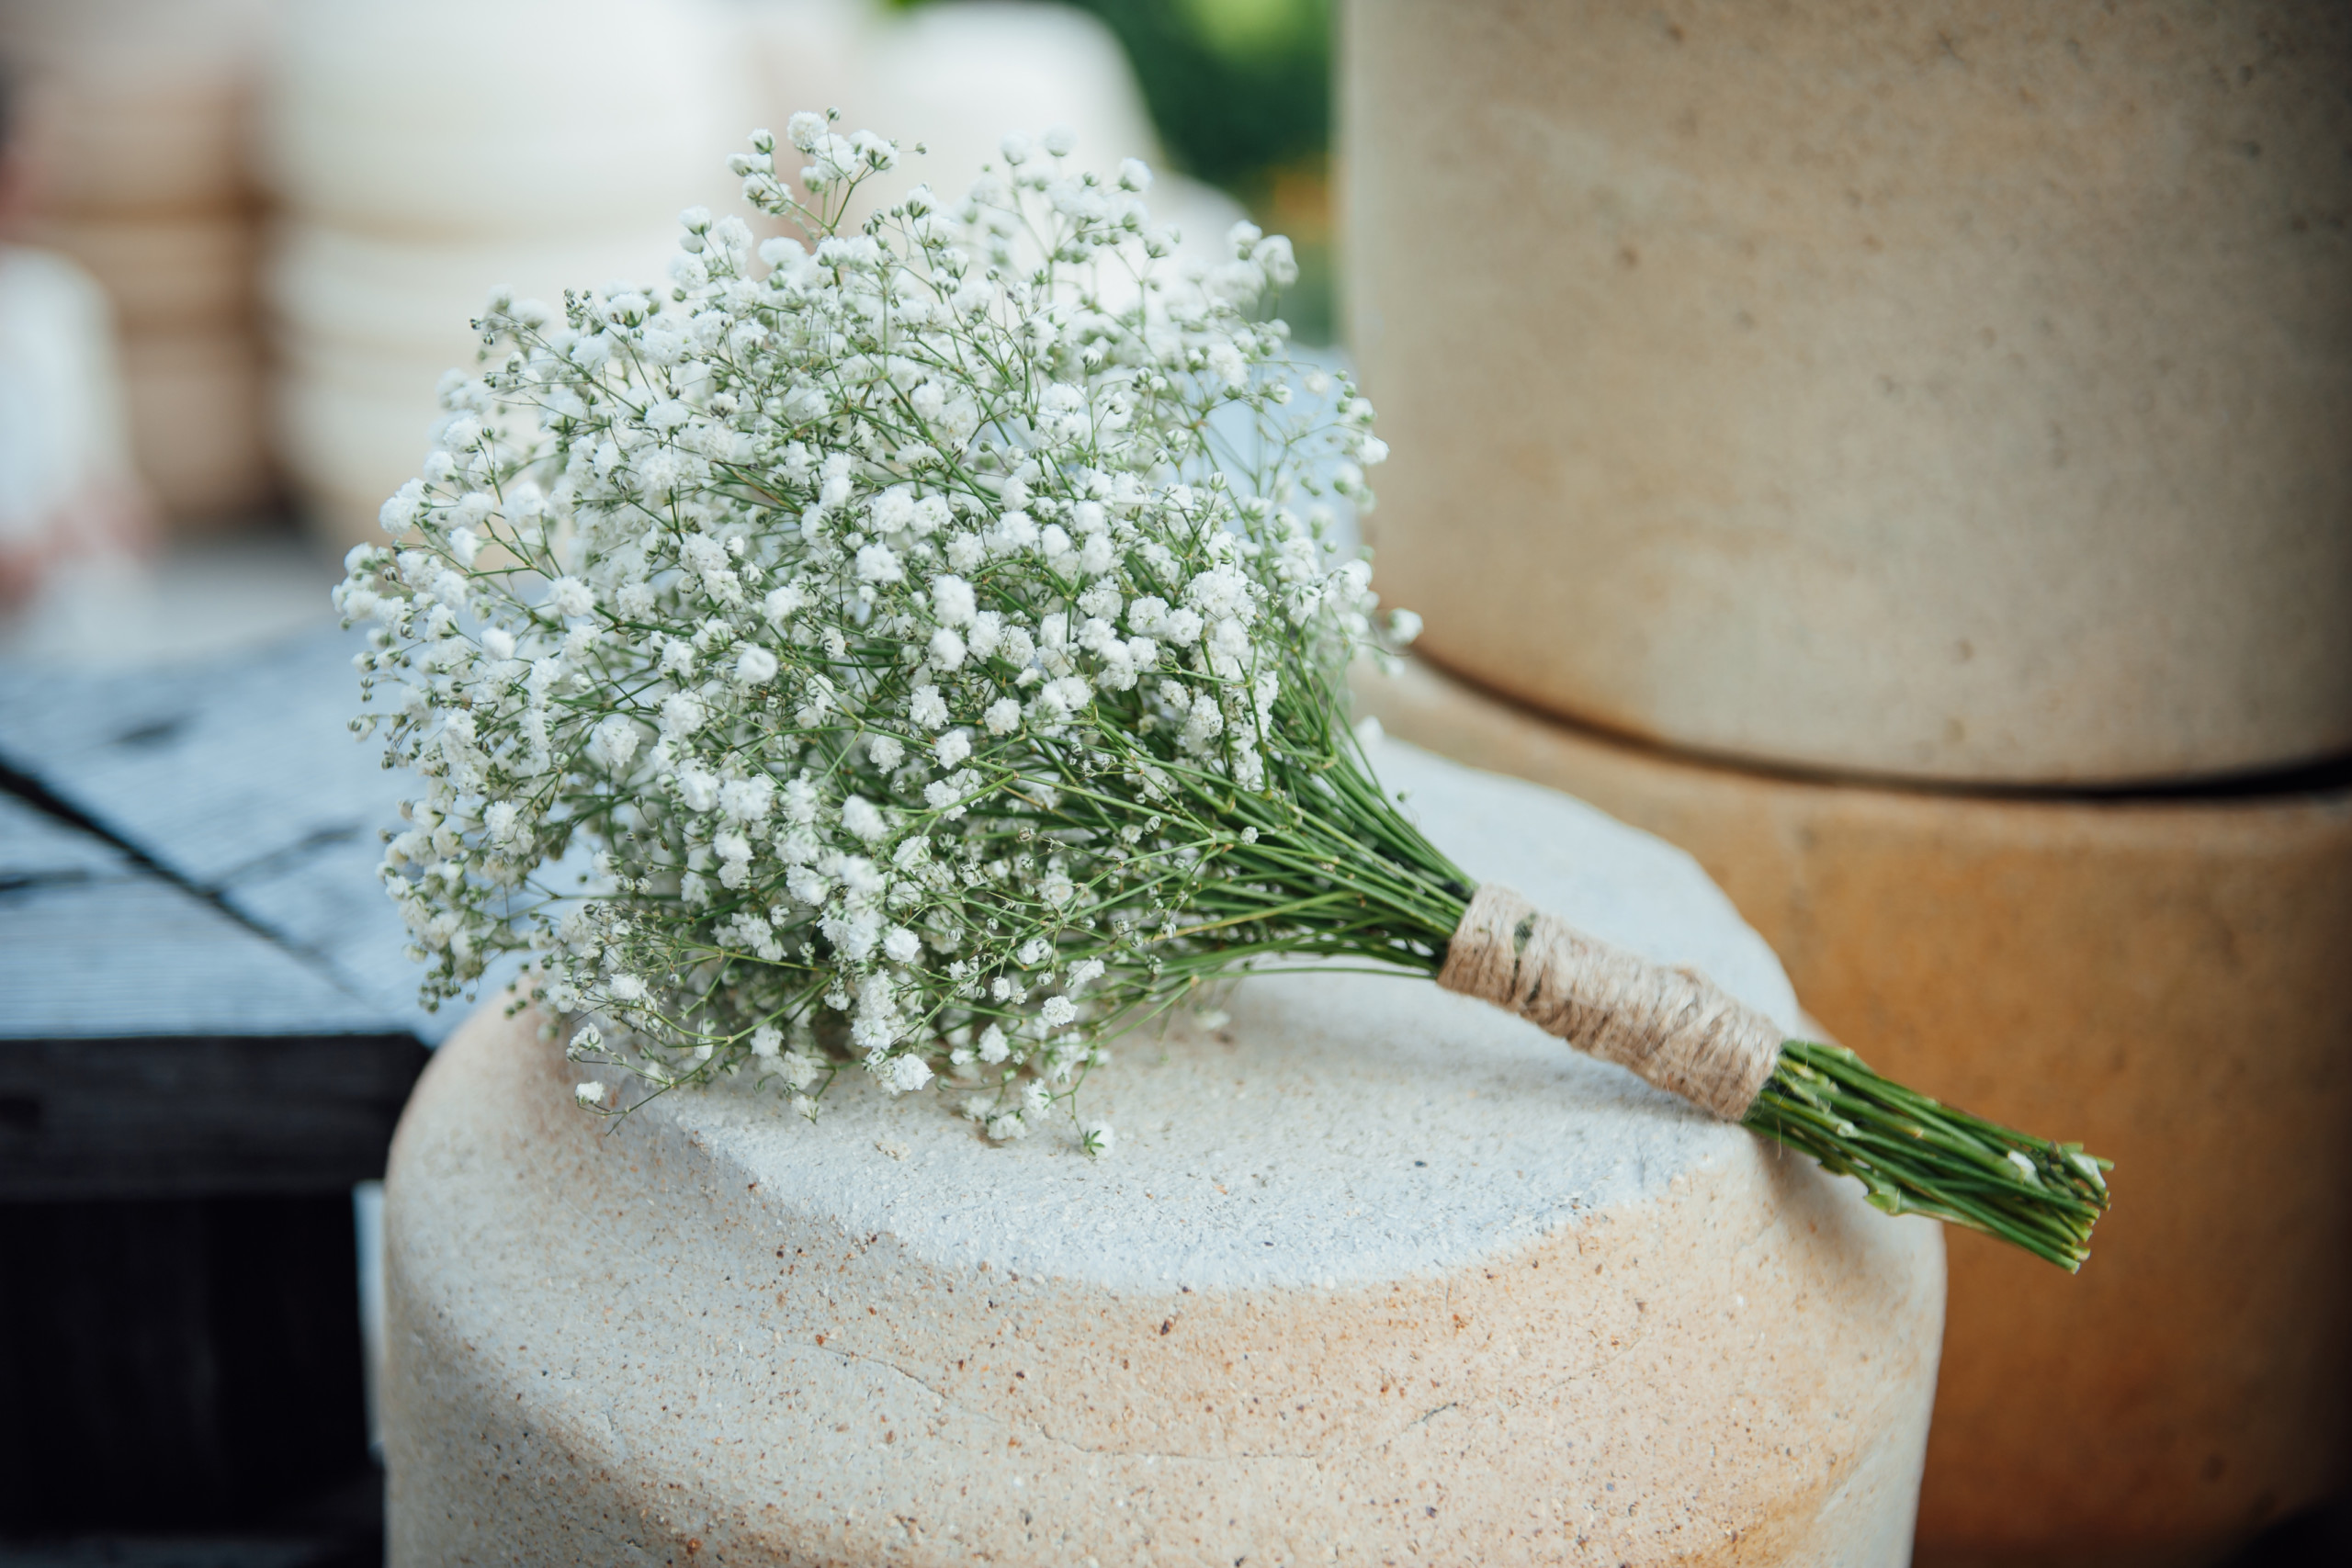 Where To Buy Baby’s Breath Flowers